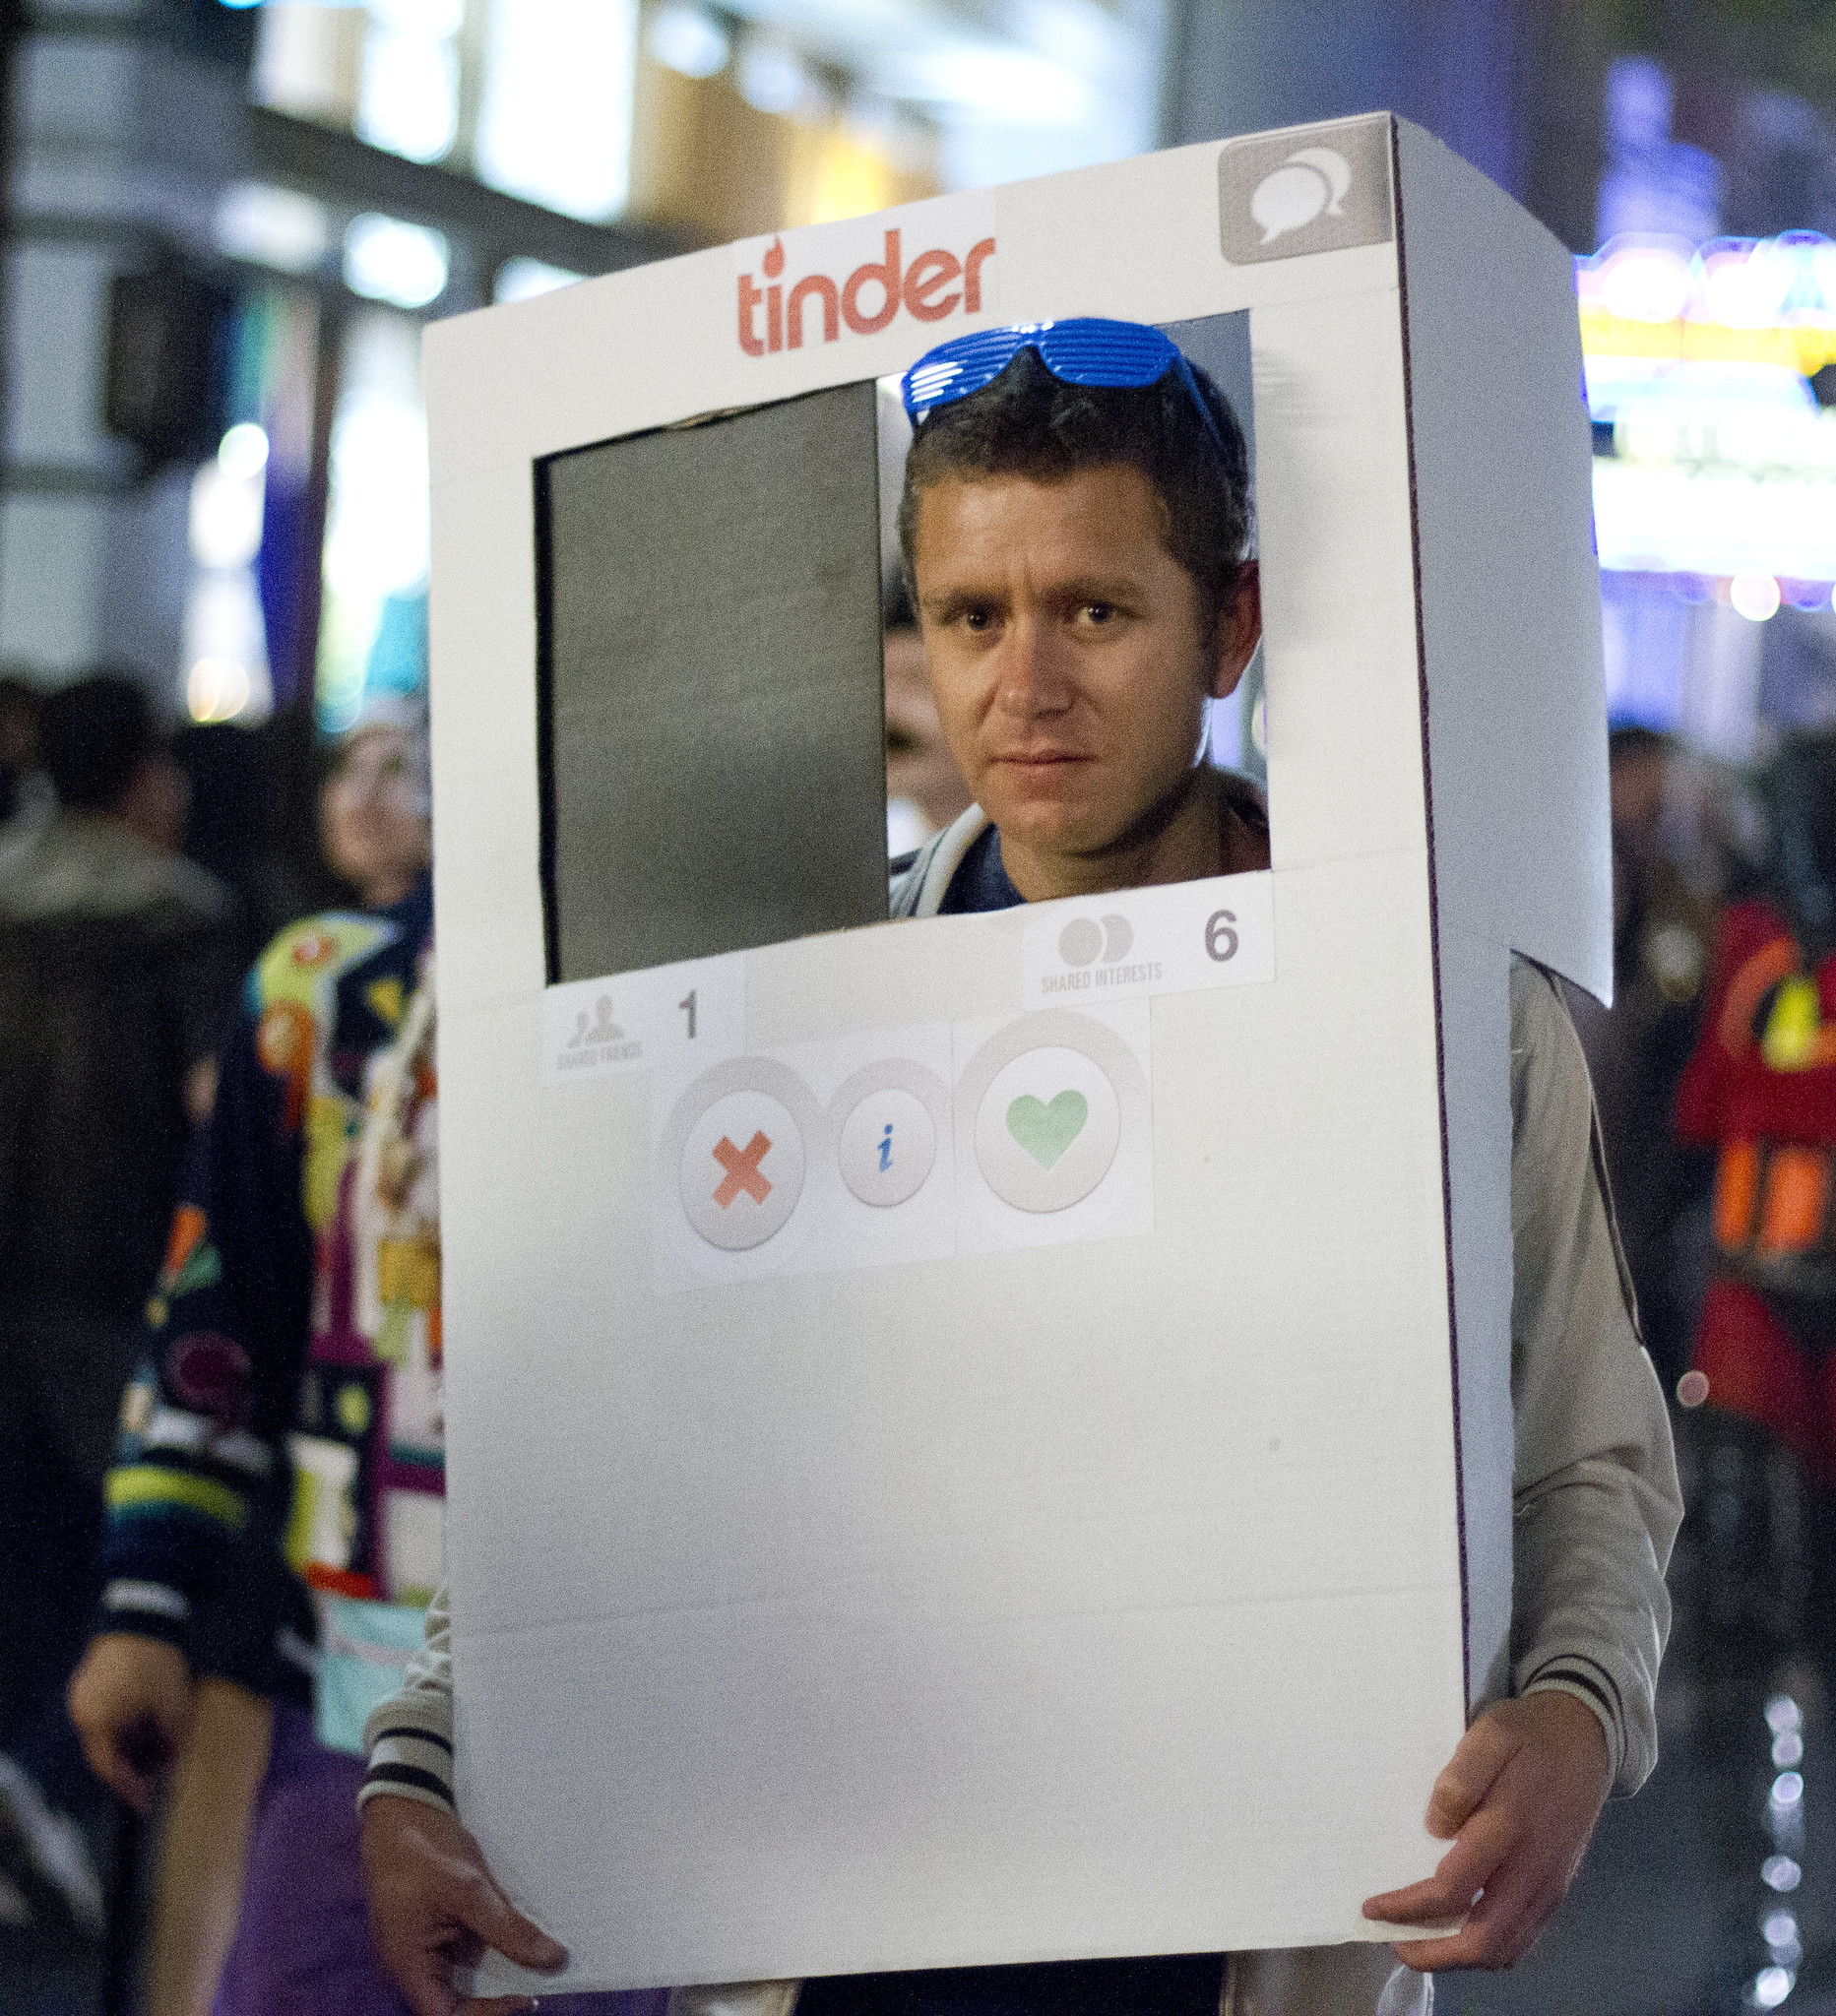 A relatively dour looking man wearing a costume resembling a phone displaying the Tinder application, with the cutout for the head being situated above the "Swipe Left" and "Swipe Right" buttons.